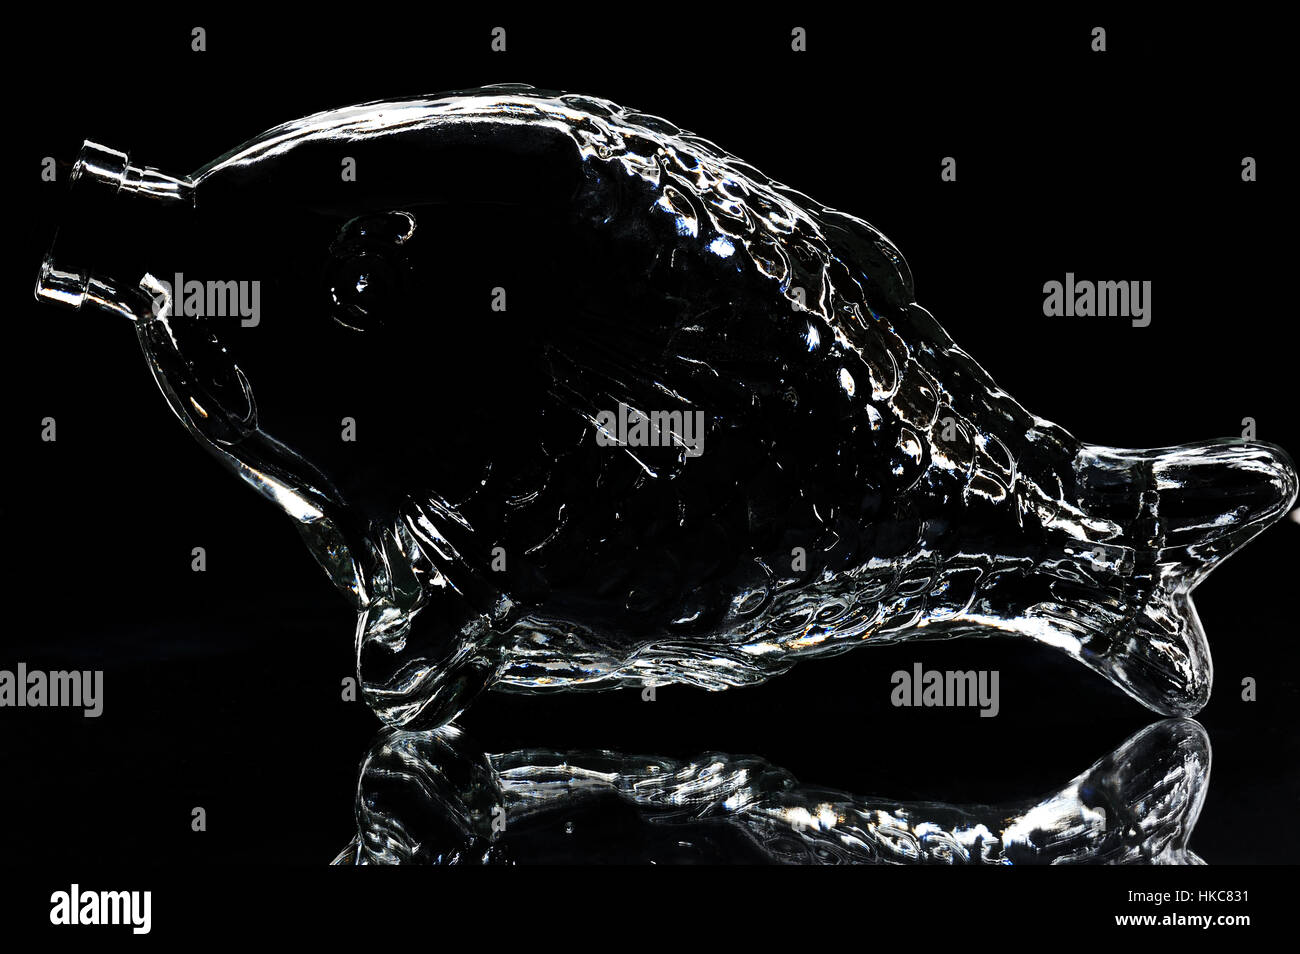 silhouette of fish shape bottle on a black background Stock Photo